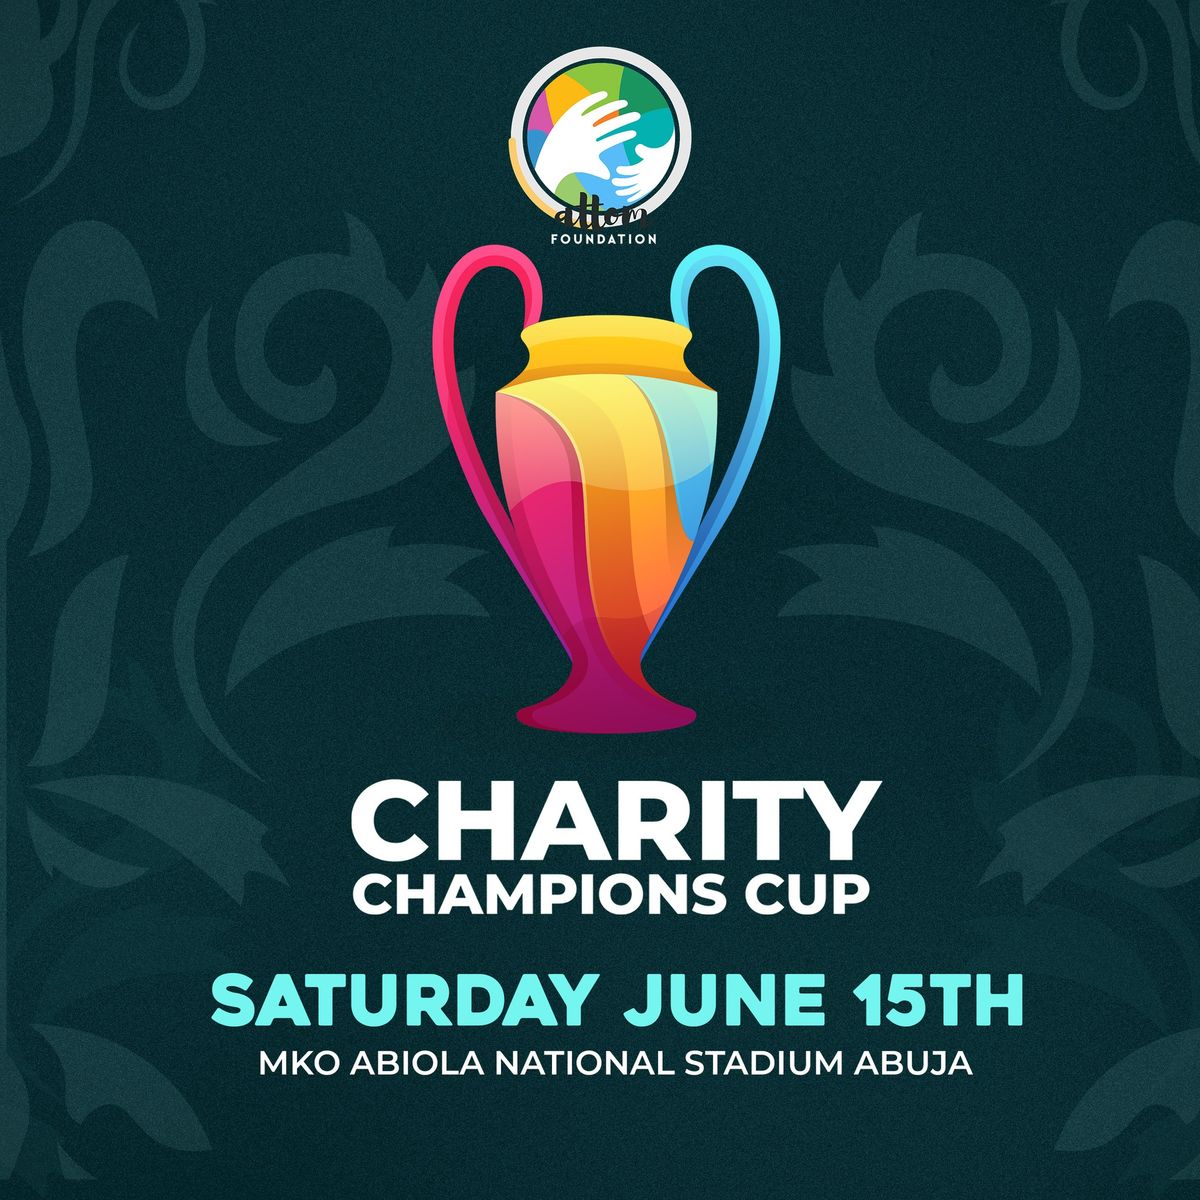 CHARITY CHAMPIONS CUP